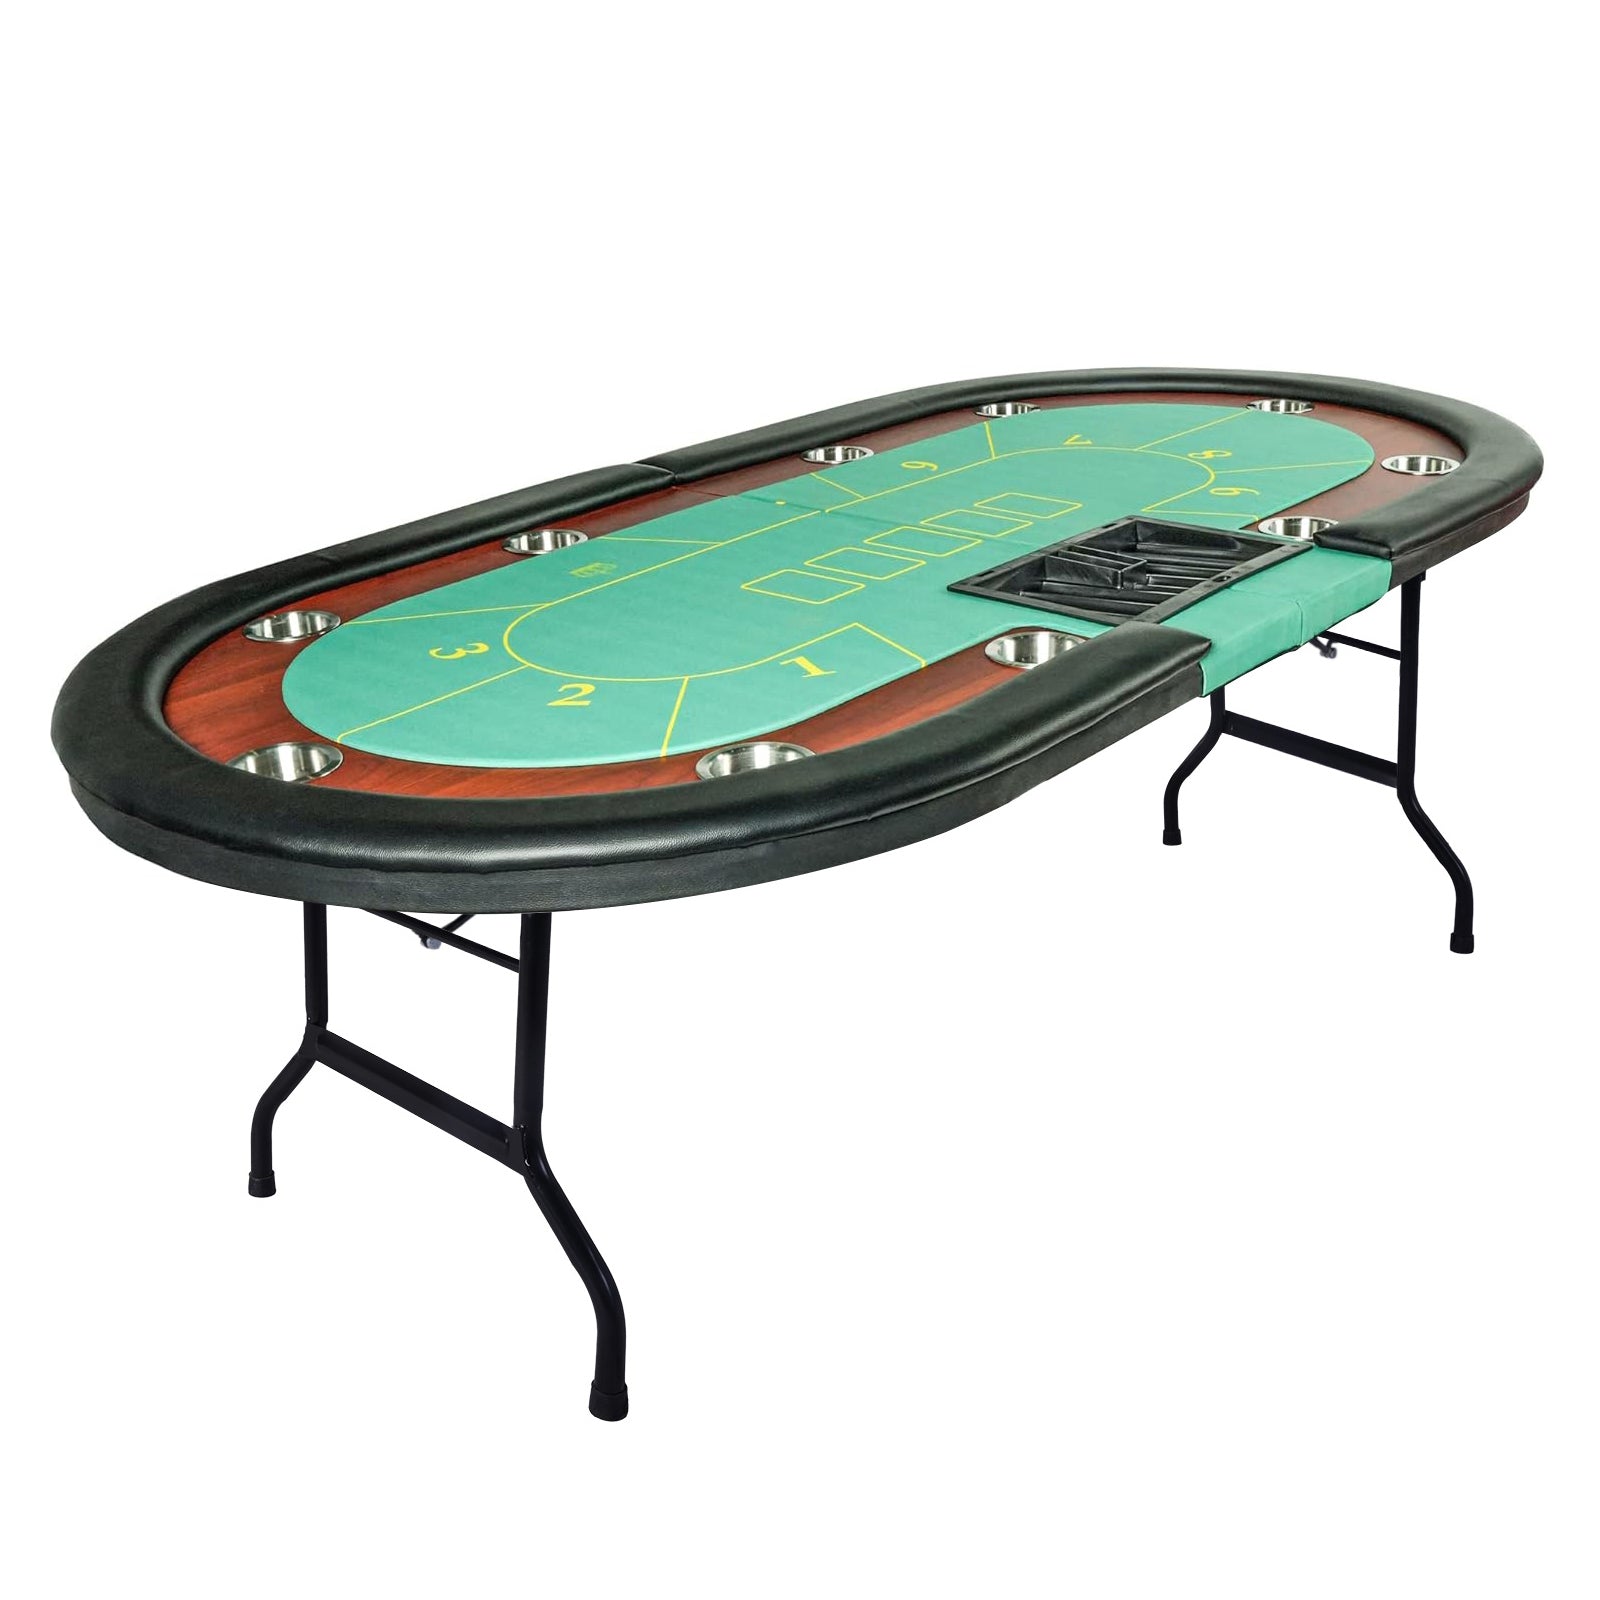 84" Folding Poker Table 10 Player Card Table with 10 Cup Holder for Texas Casino, Green